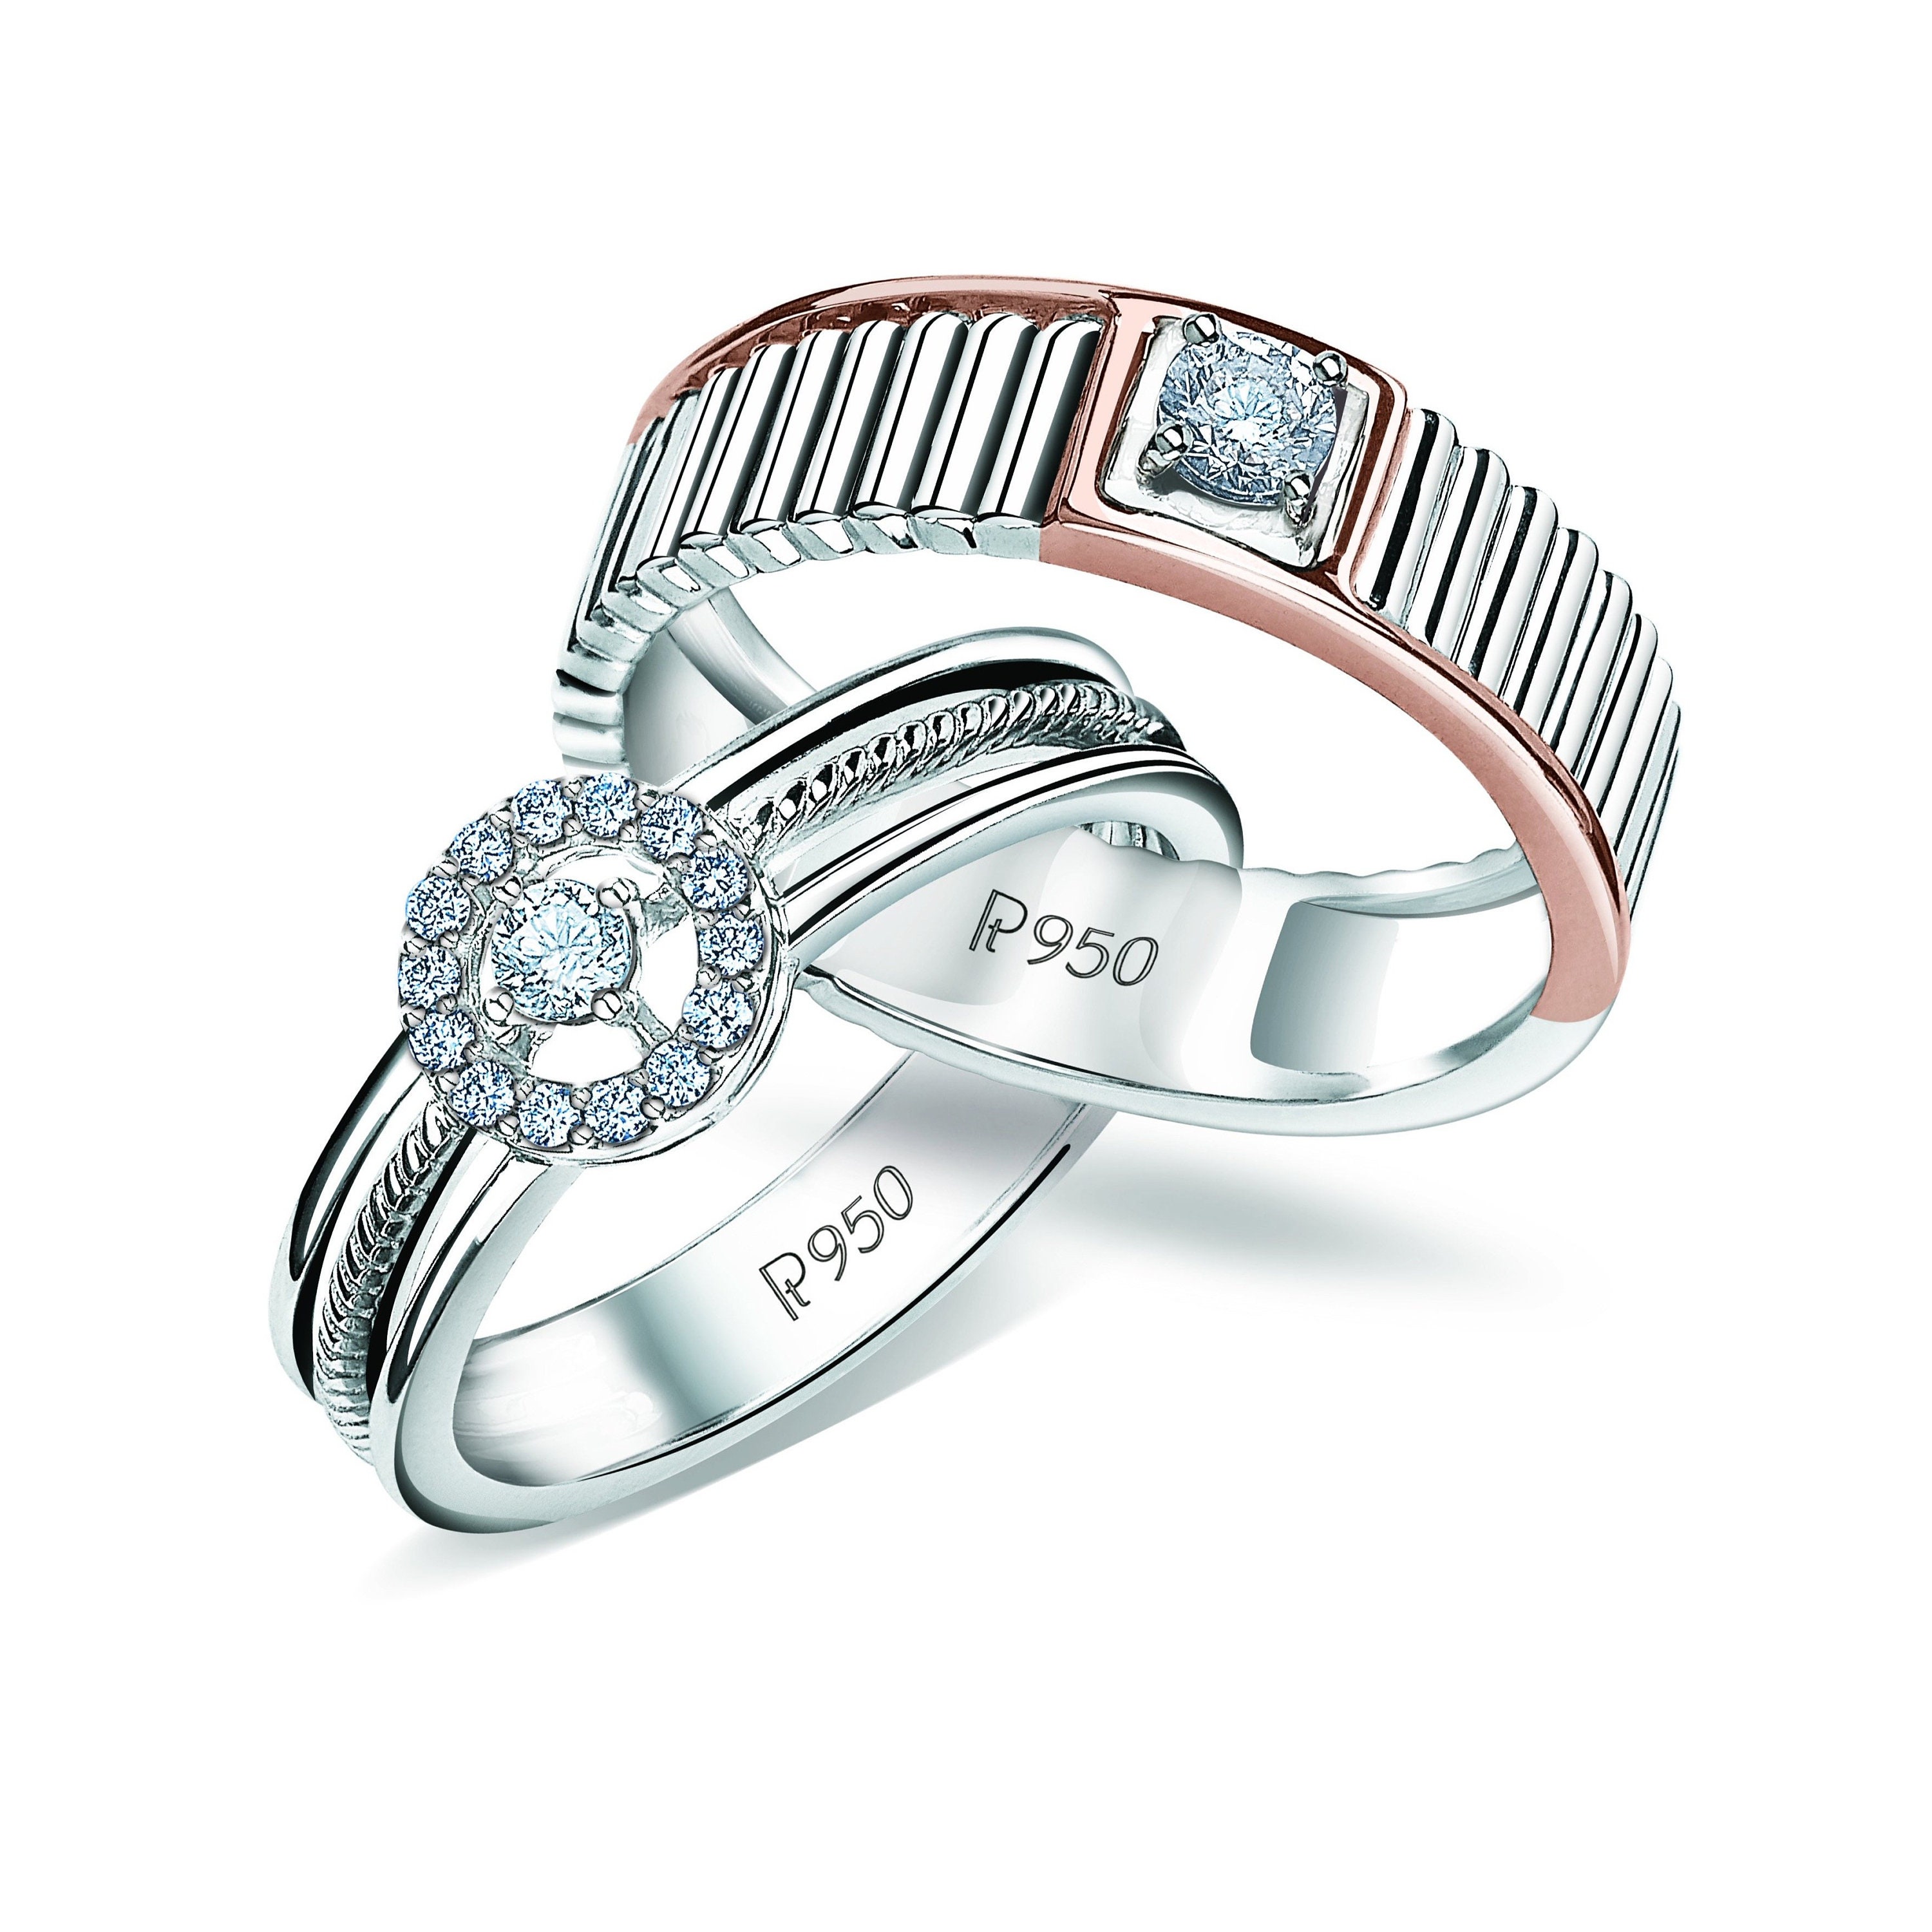 Gold And Platinum Couple Rings | His And Hers Wedding Rings Platinum |